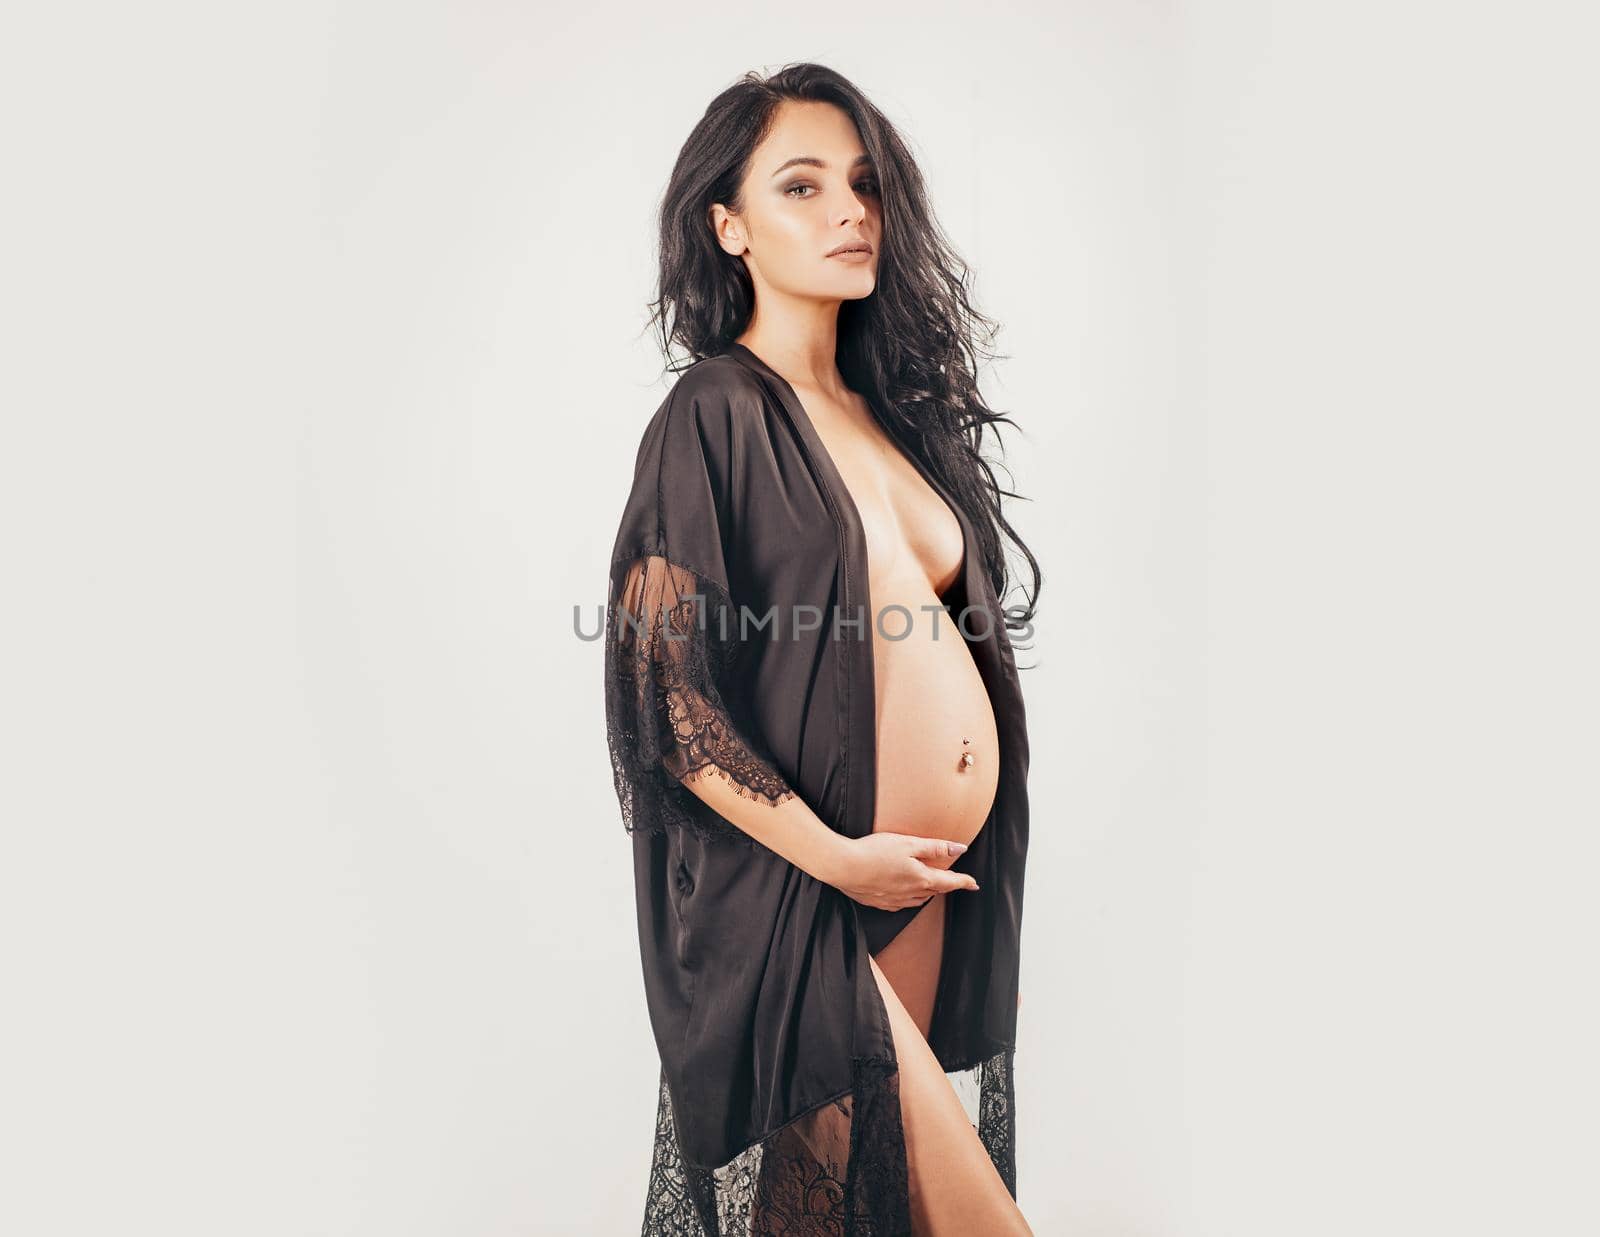 Maternity preparation. future mother have baby inside. womens health. girl with big belly. life birth expectation. beautiful pregnant woman in silk underwear. pregnancy. She is going to be a mom soon.